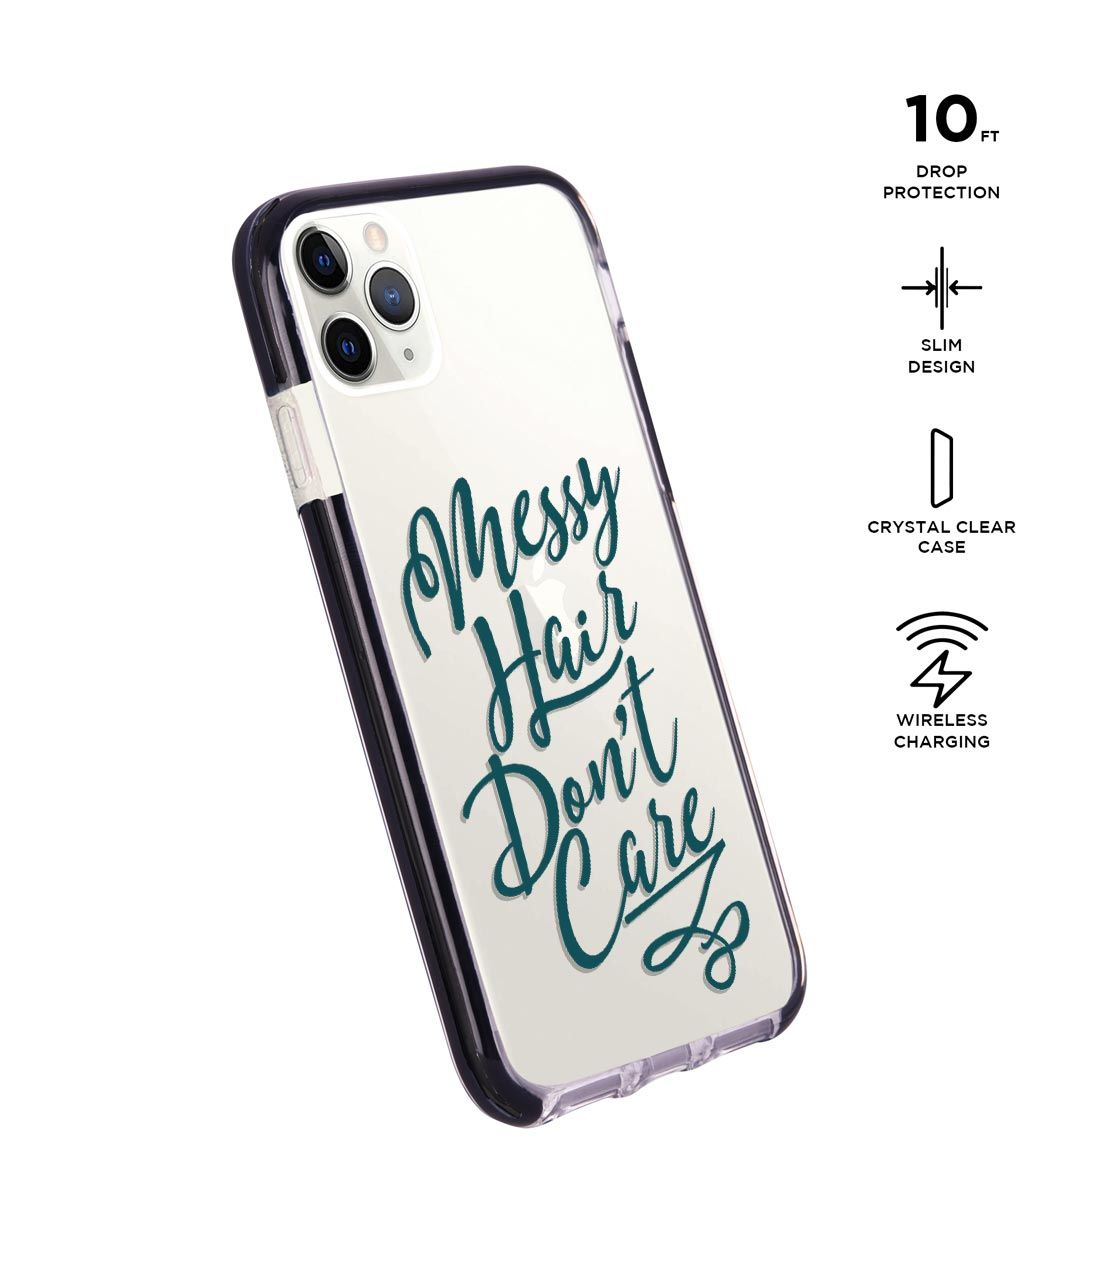 Messy Hair Dont Care - Extreme Phone Case for iPhone 11 Pro